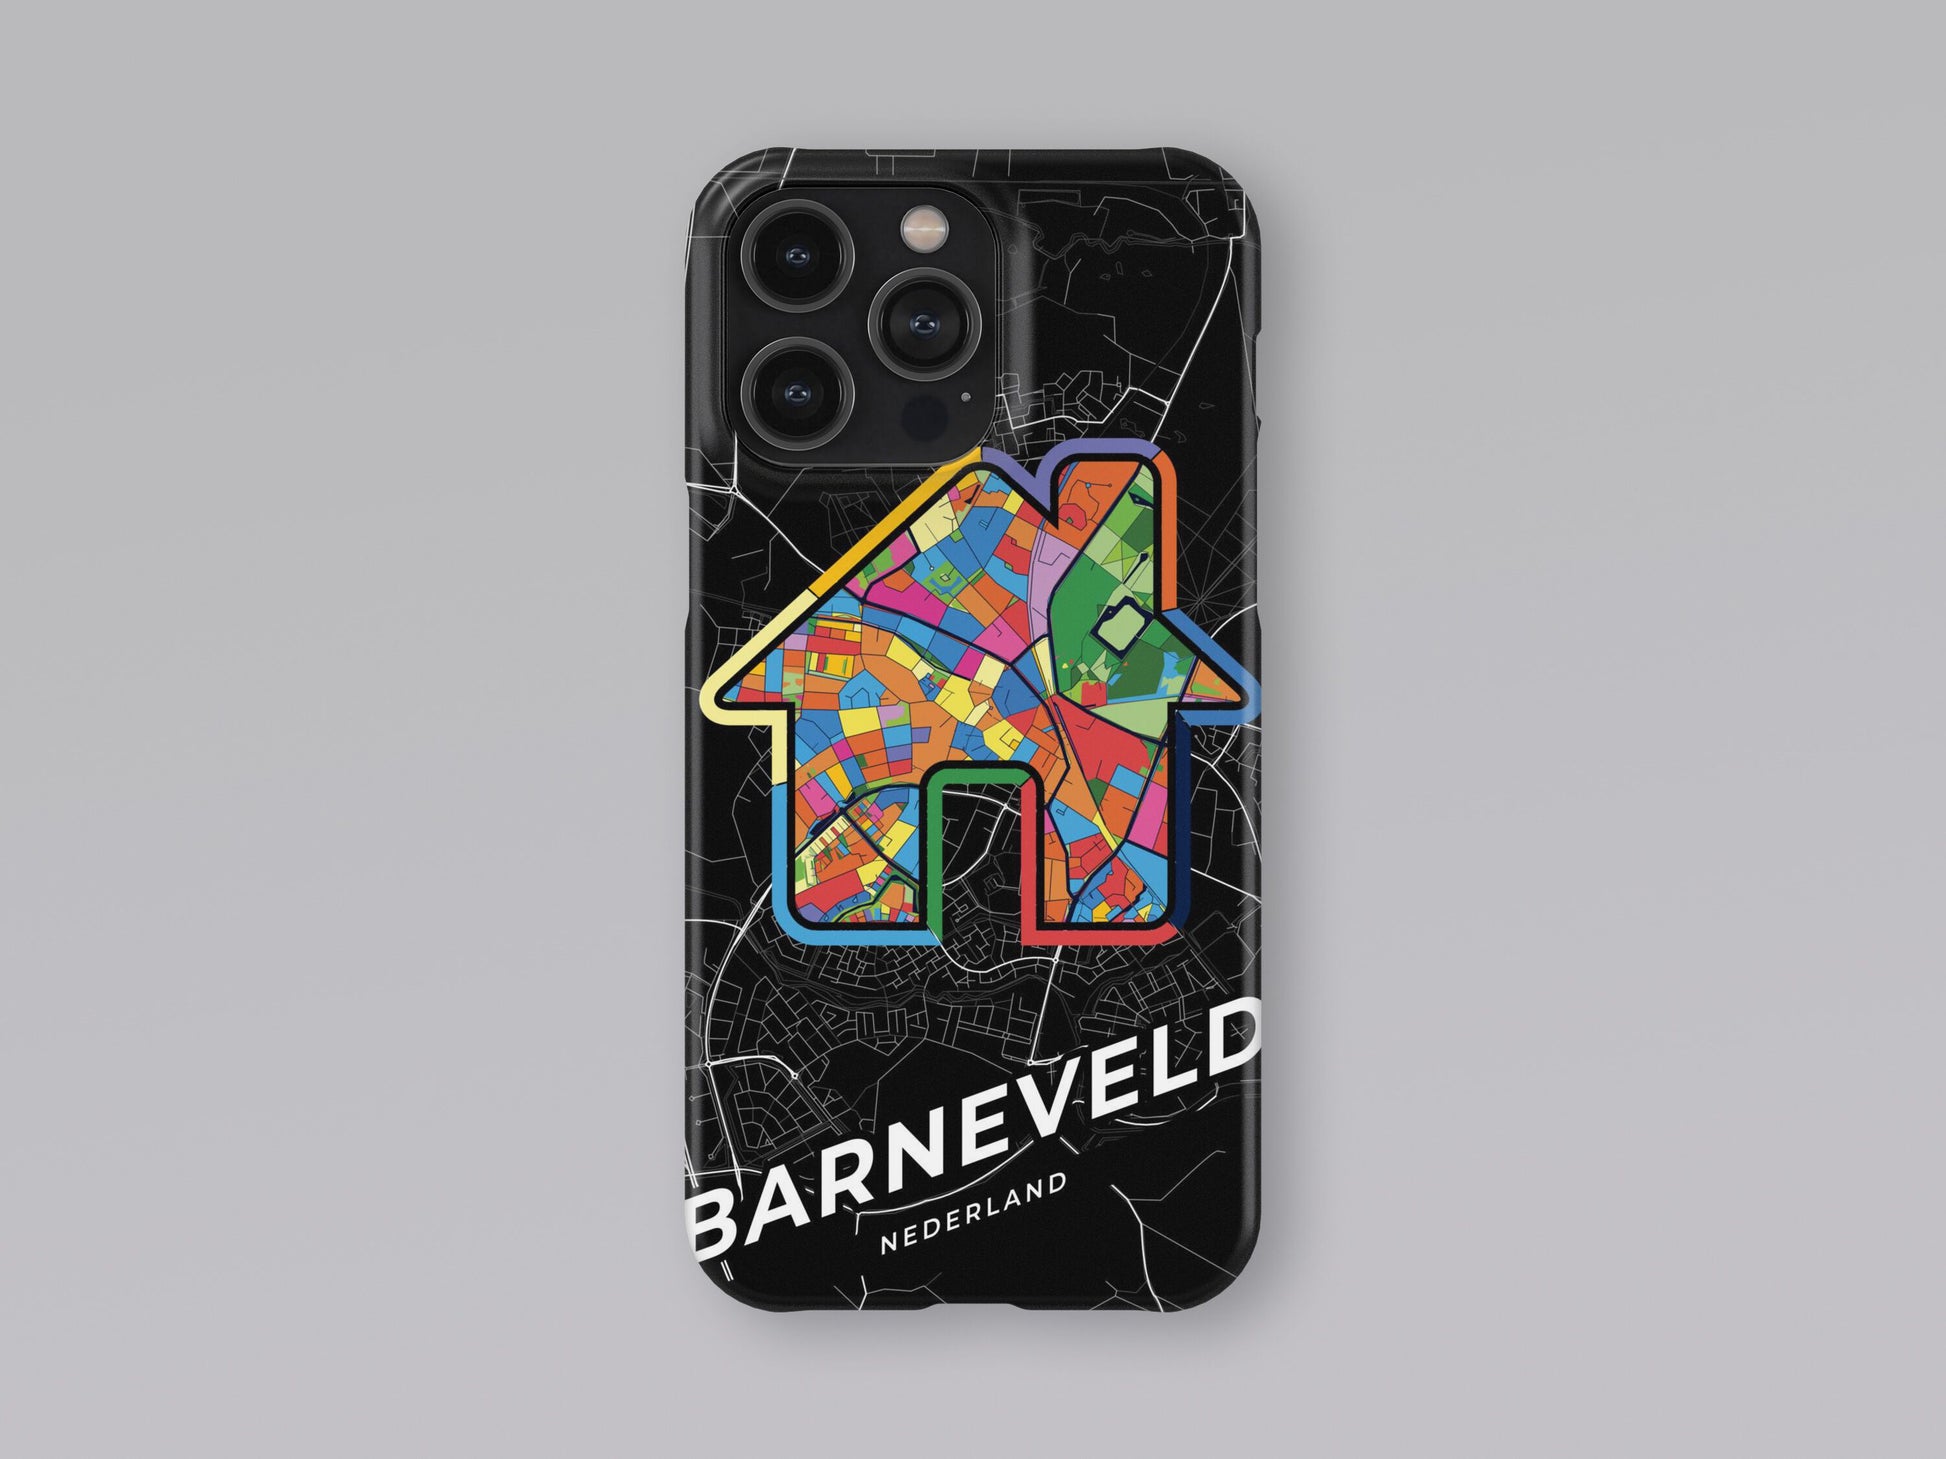 Barneveld Netherlands slim phone case with colorful icon. Birthday, wedding or housewarming gift. Couple match cases. 3